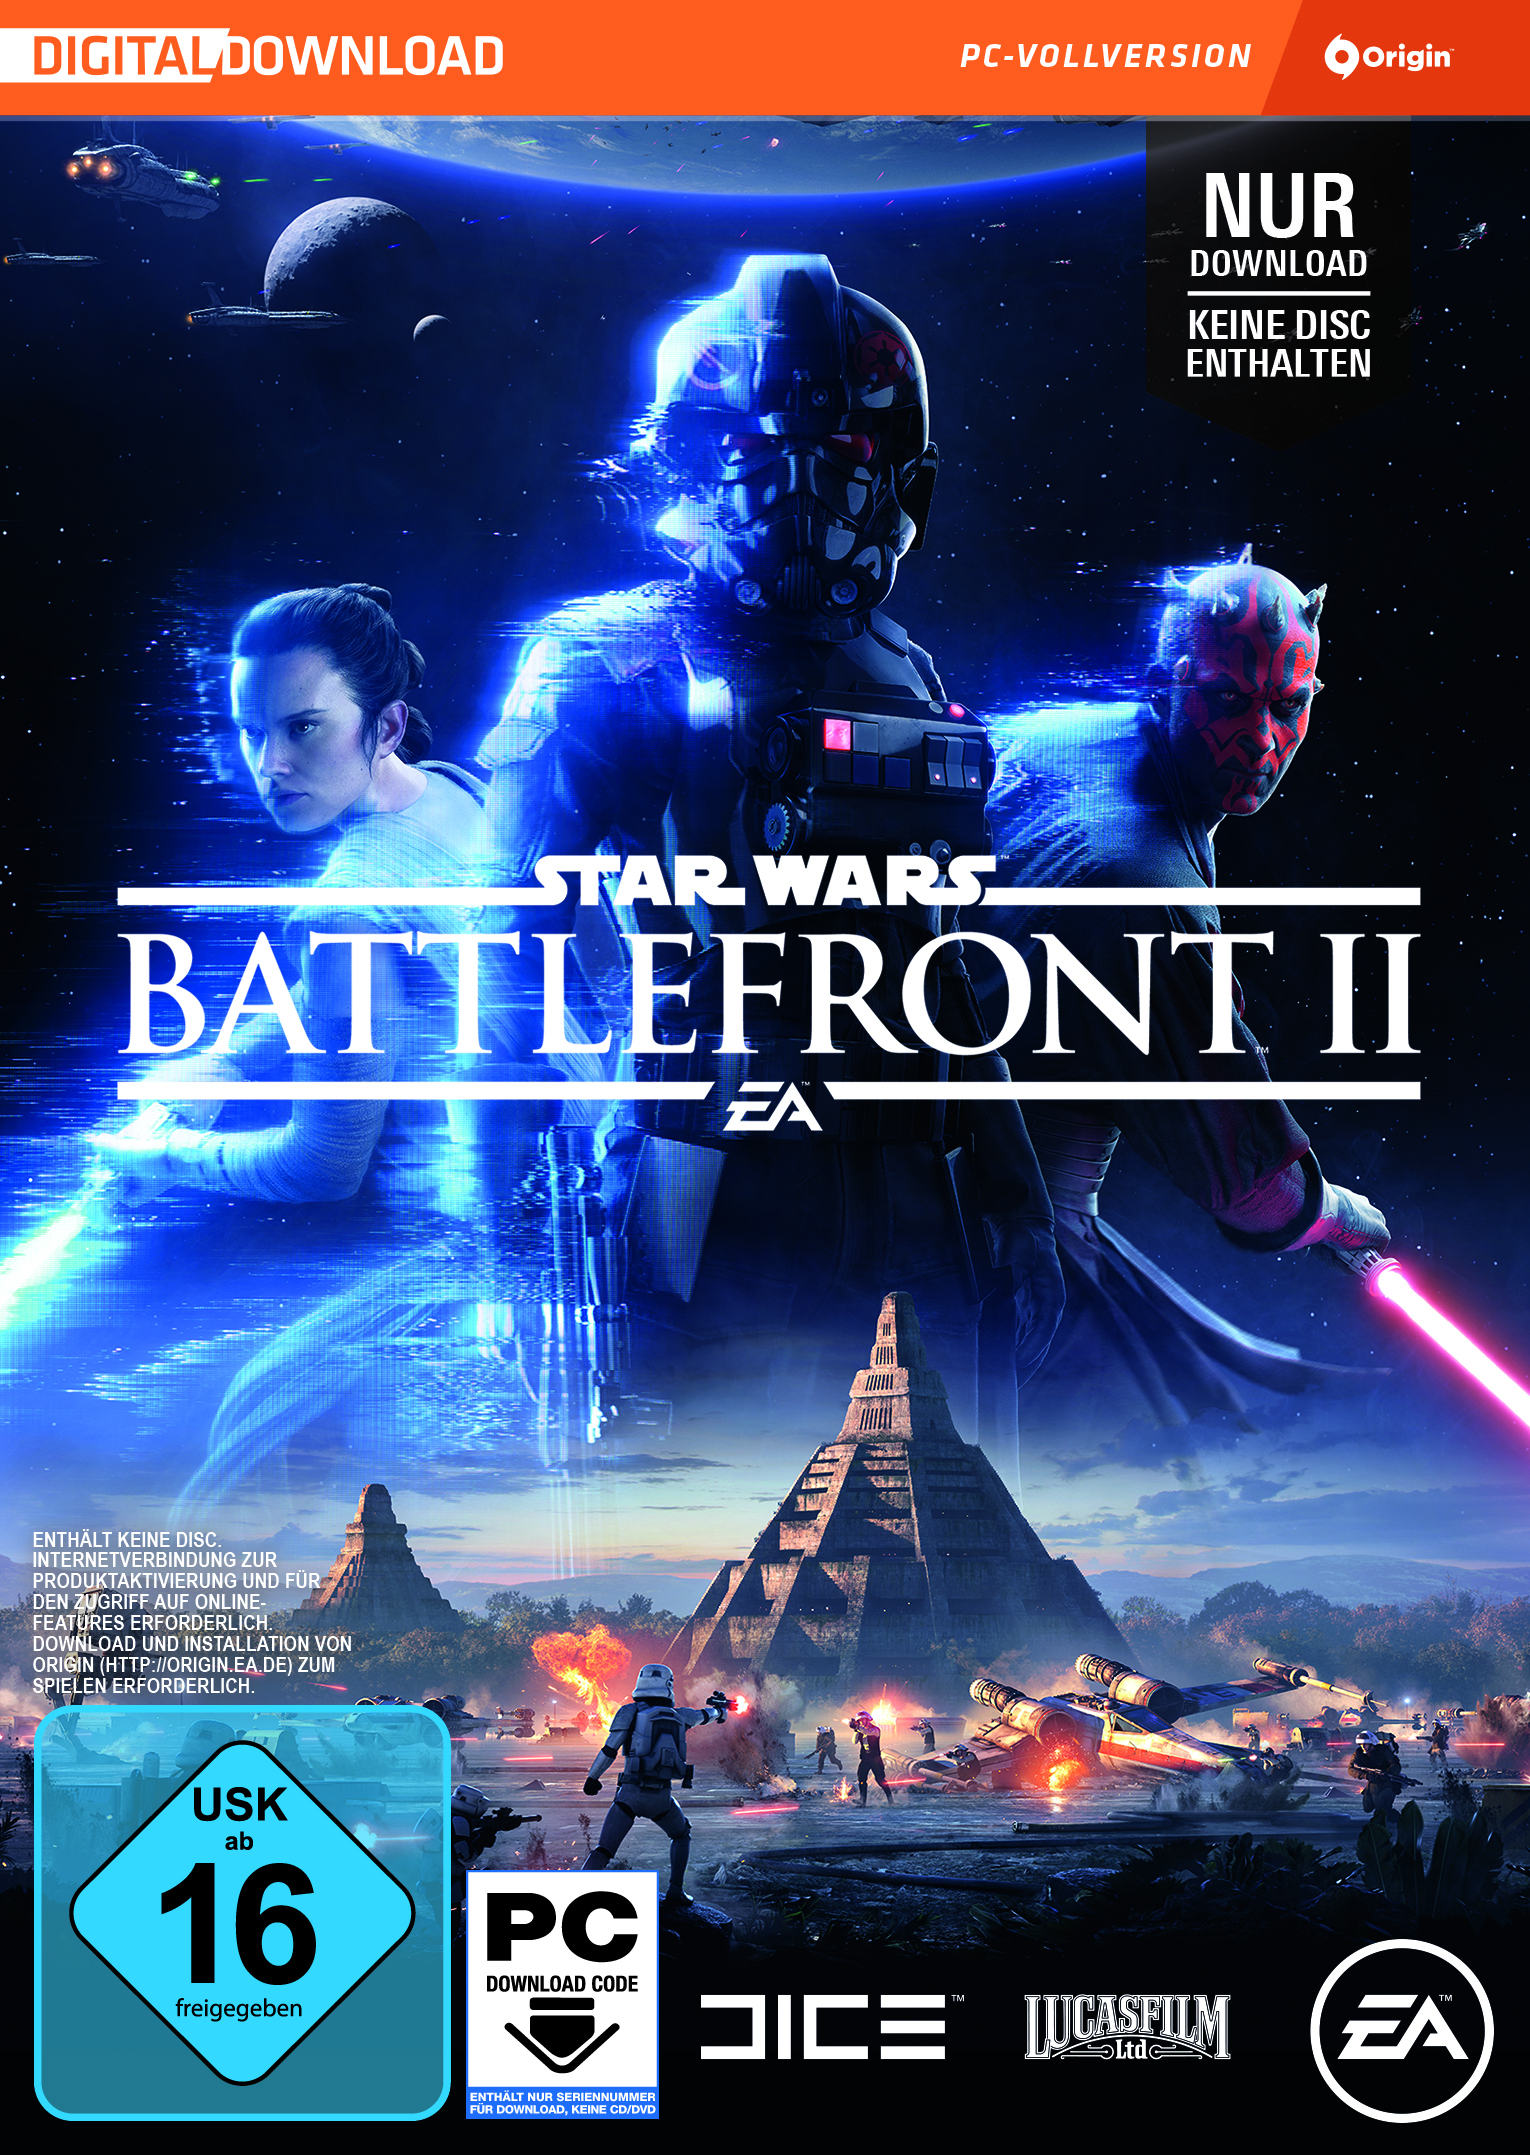 Wars Box) Battlefront - II (Code Star the in [PC]